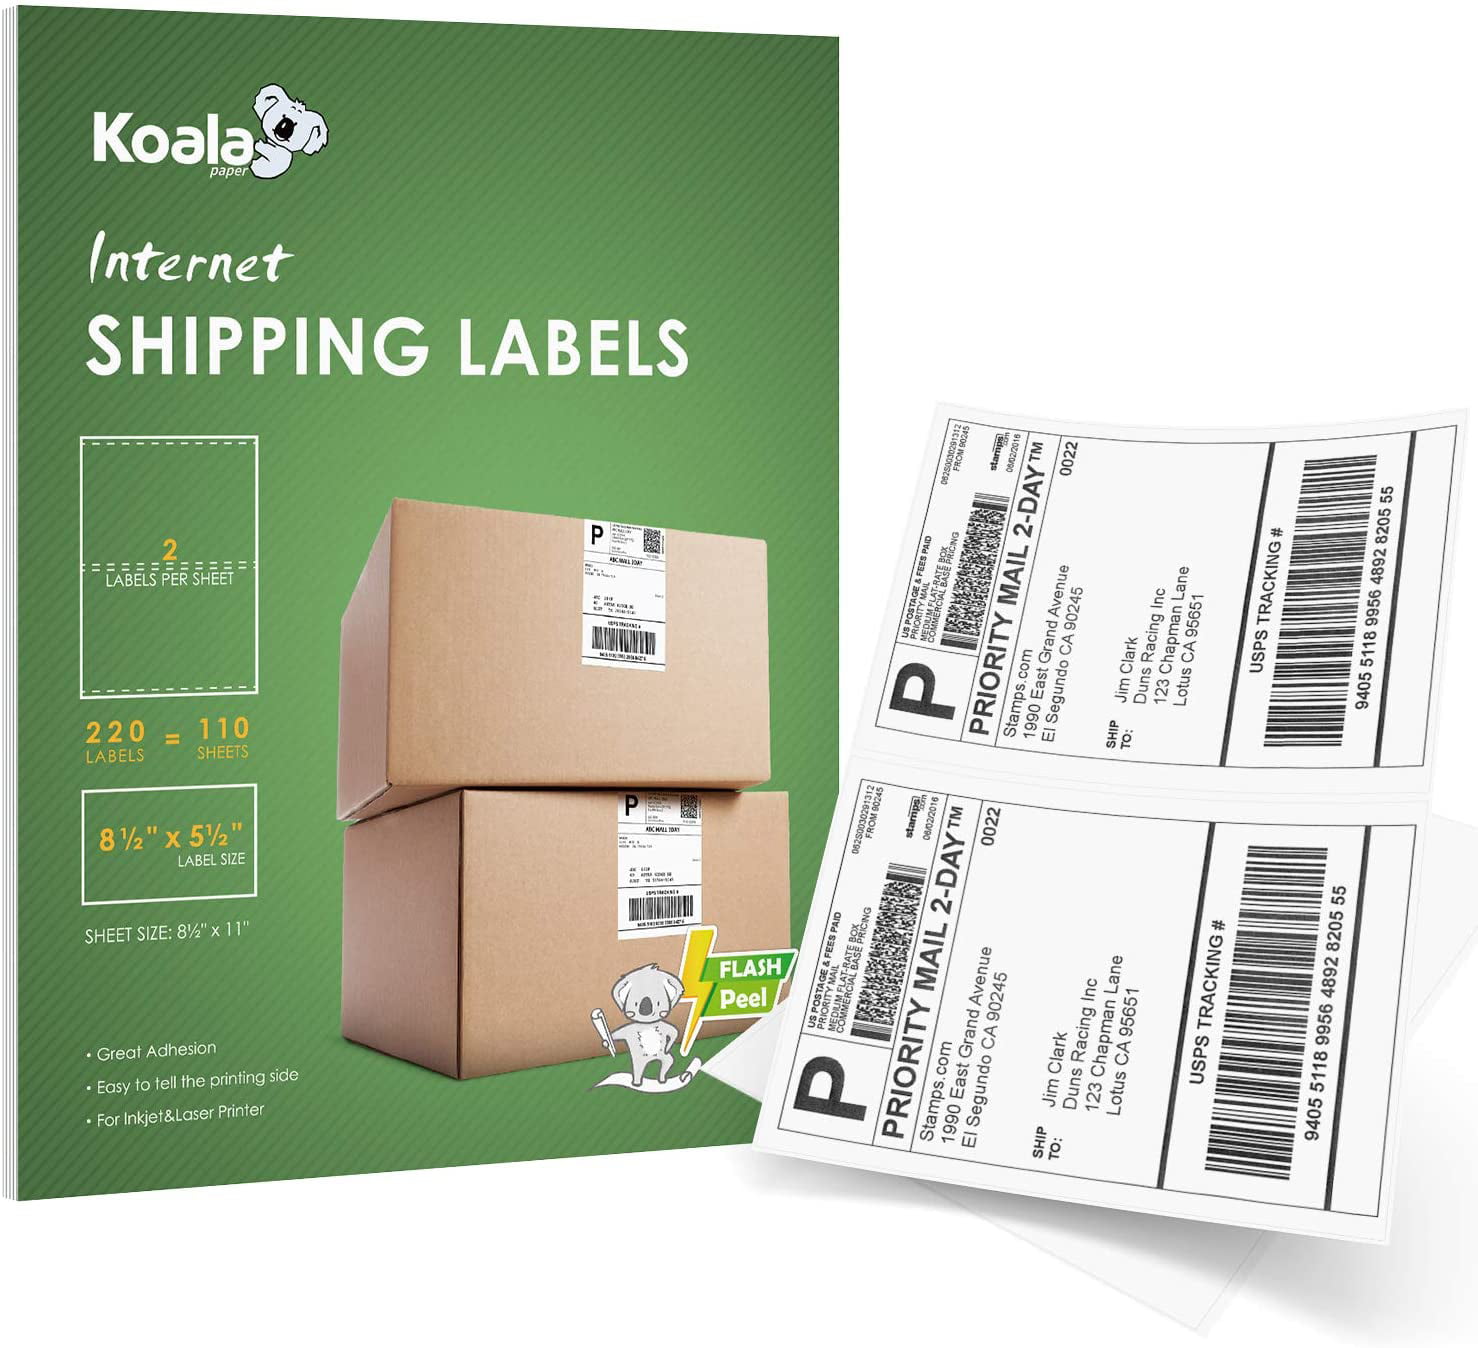 SUPERIOR Quality Mailing Shipping Labels 8.5x5.5 Half Sheet Self Adhesive 